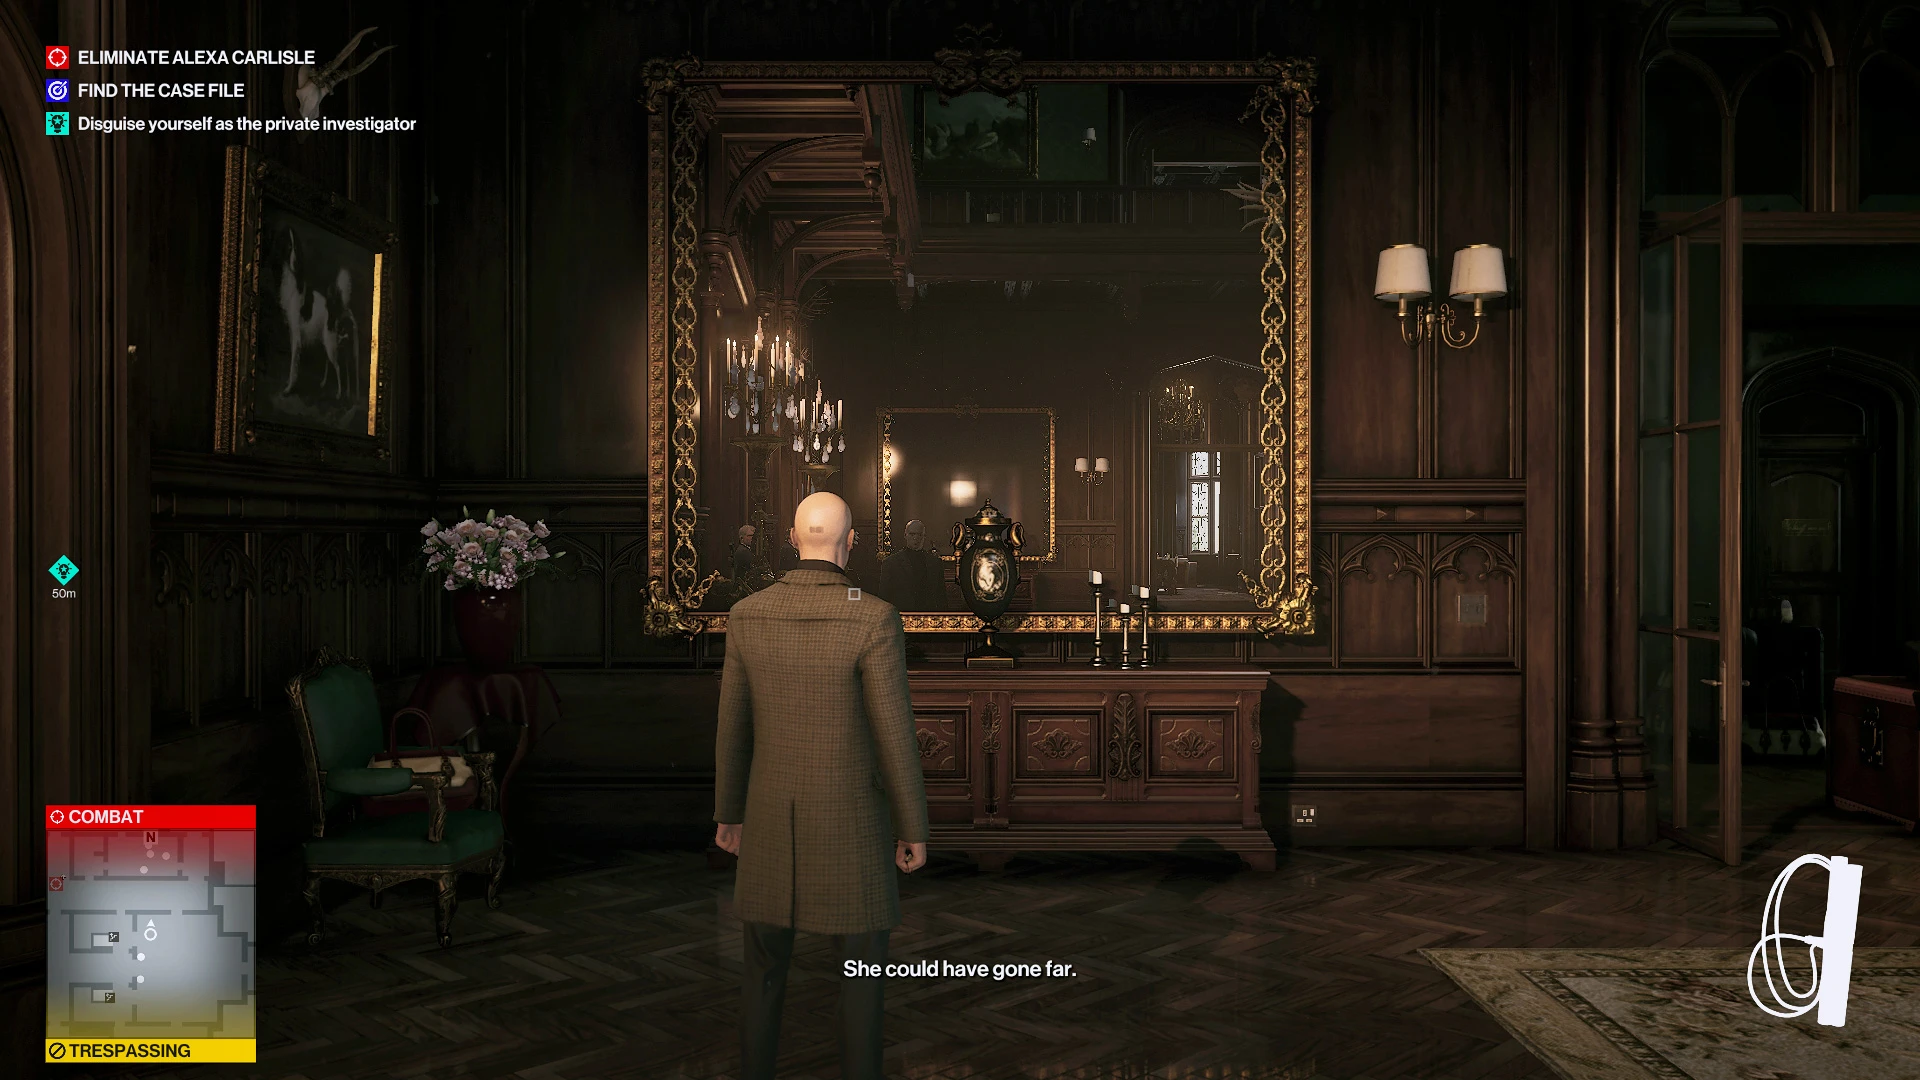 How to easily install Hitman 3 mods 